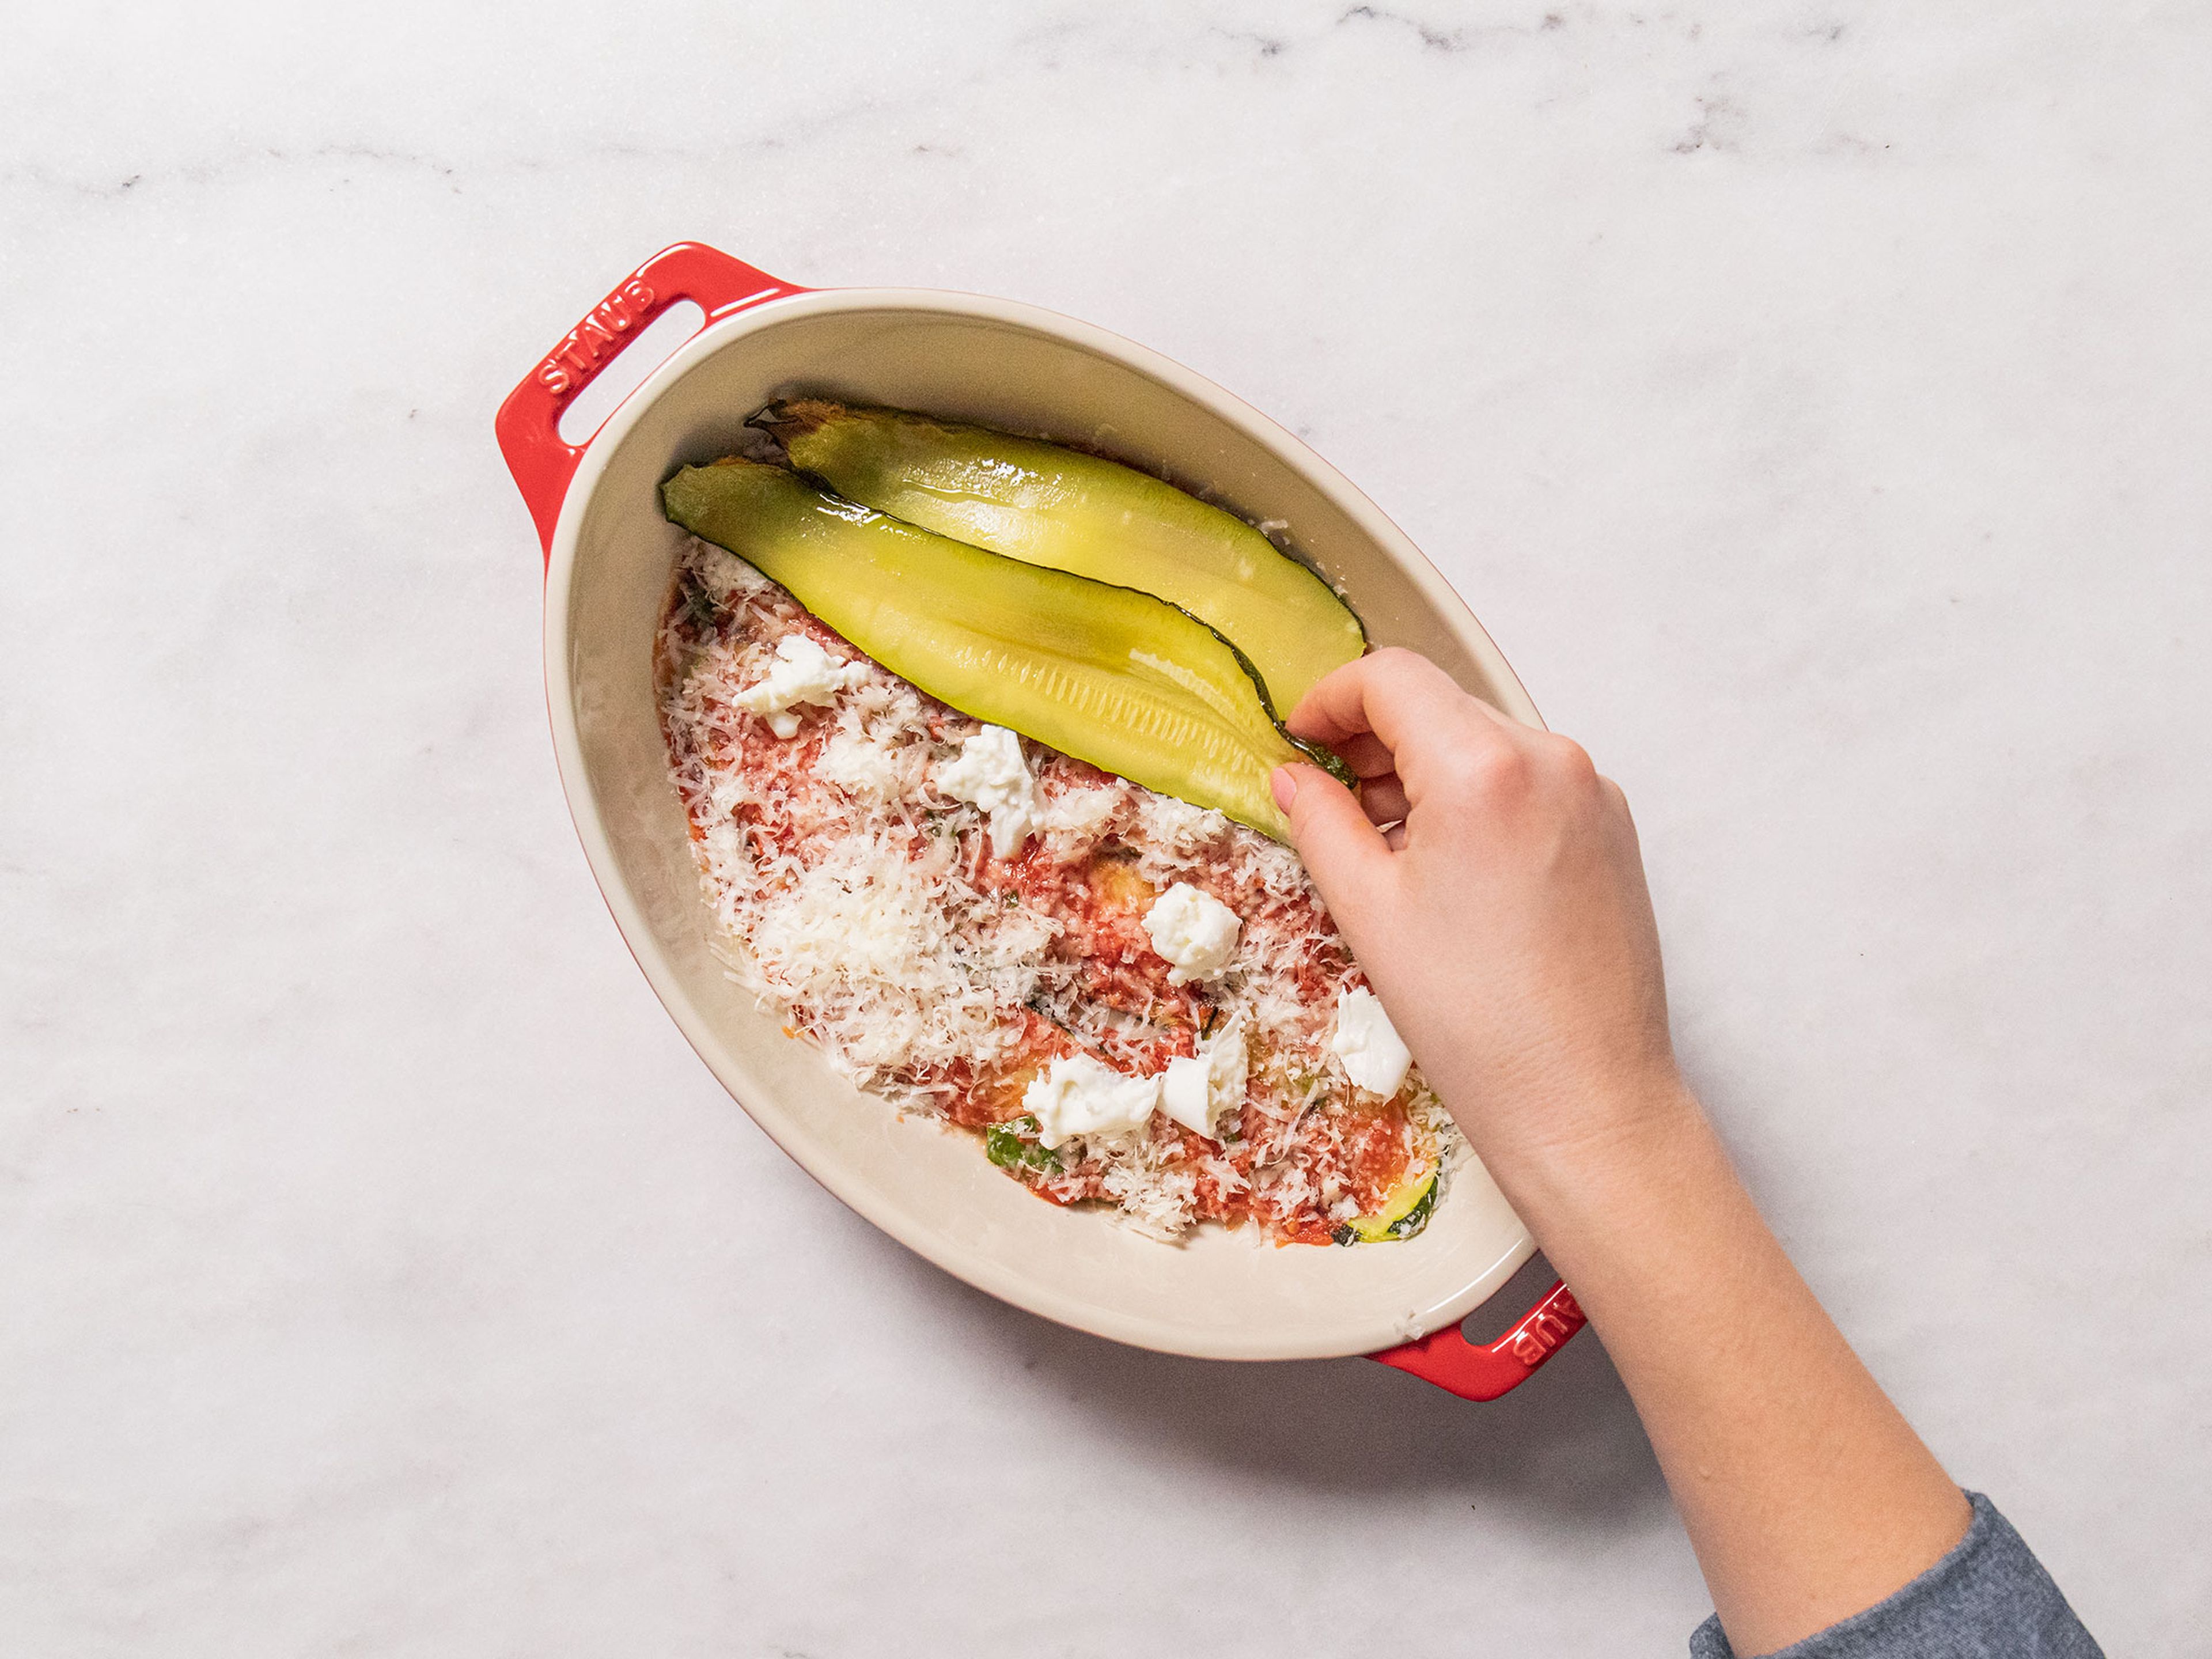 Cover the bottom of a baking dish with baked zucchini slices. Spread some tomato sauce over the zucchini, and top with Parmesan cheese and mozzarella. Repeat until all ingredients are gone, finishing the top layer with breadcrumbs.